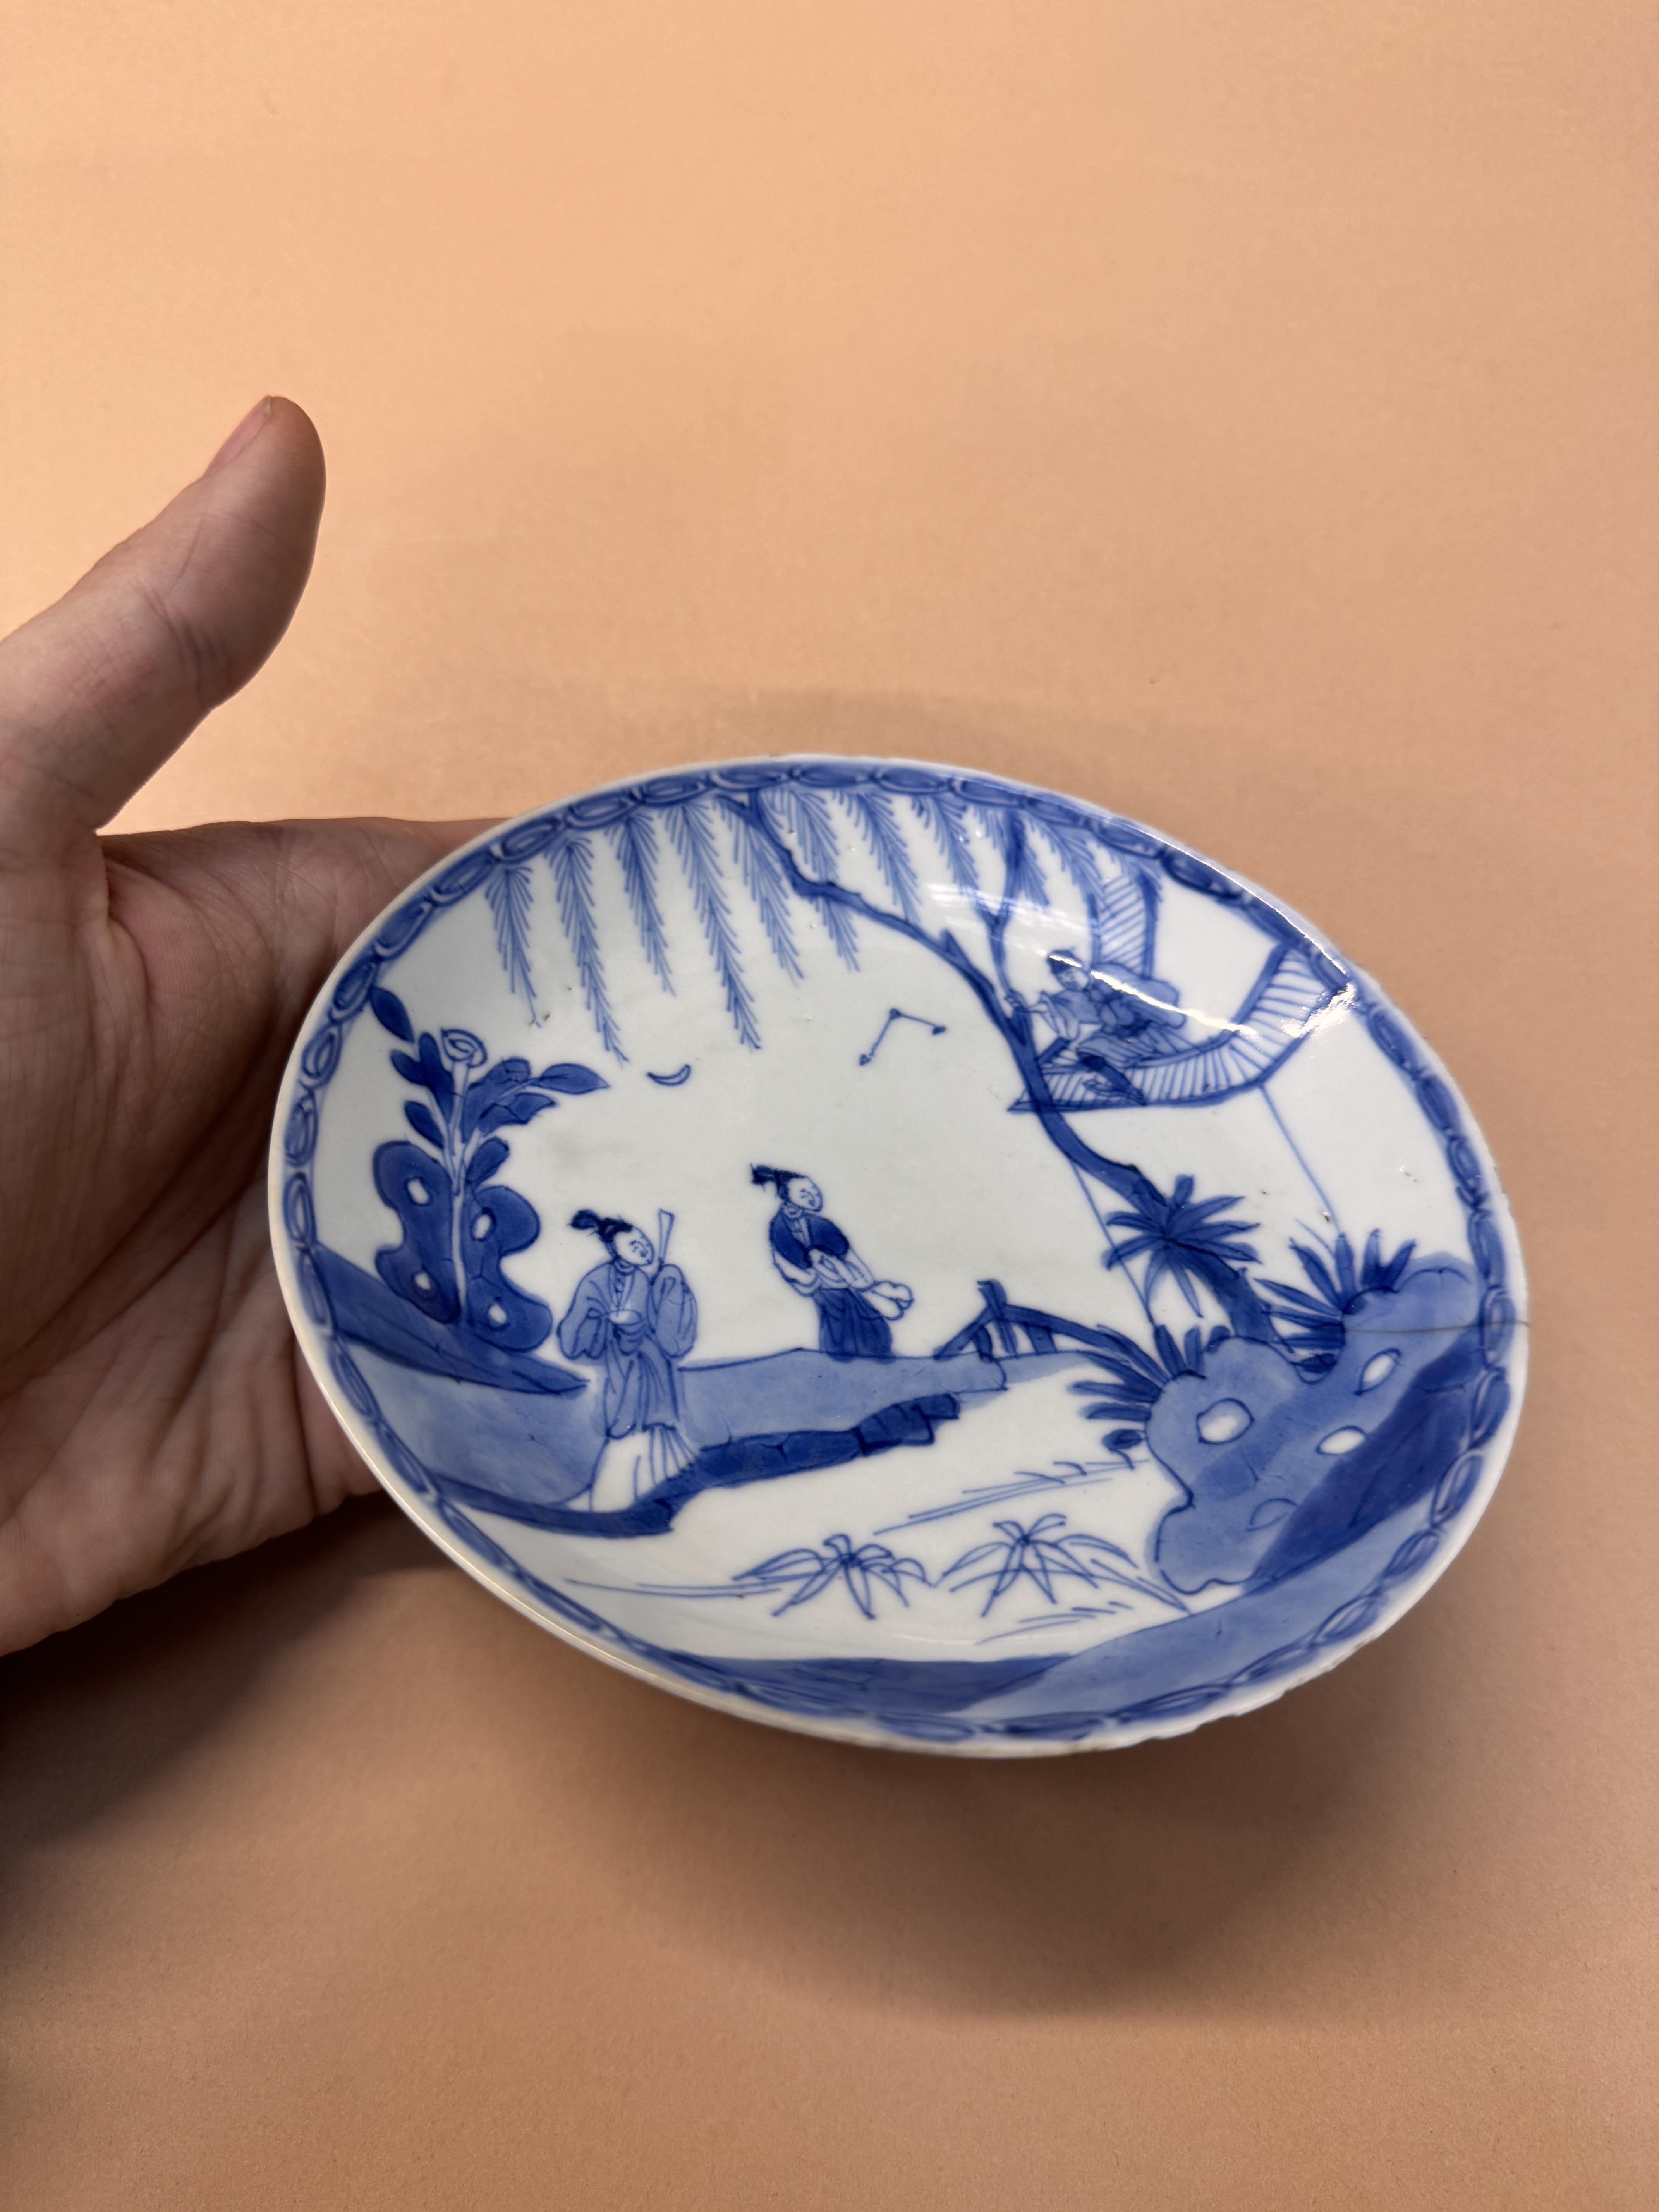 A CHINESE BLUE AND WHITE 'ROMANCE OF THE WESTERN CHAMBER' DISH 清康熙 青花繪西廂記人物故事圖盤 - Image 3 of 9